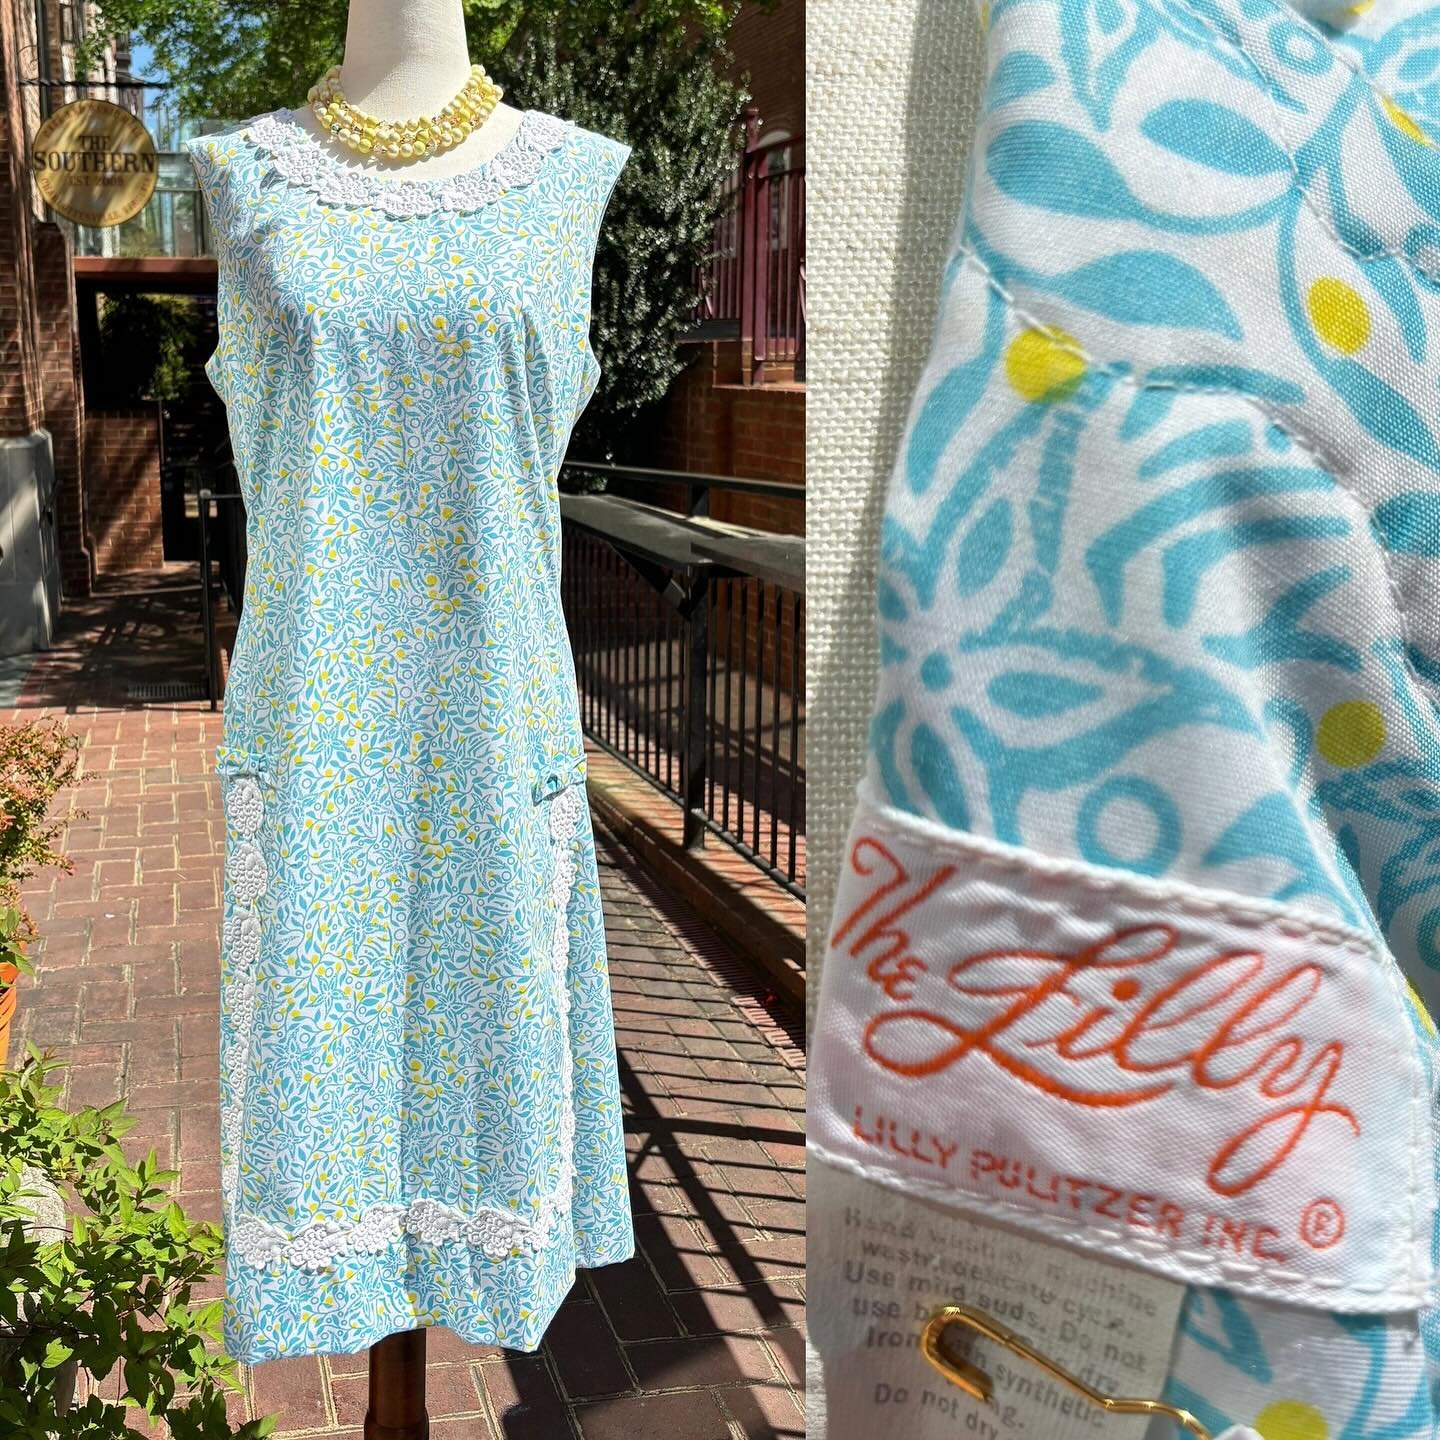 🌼🦋Vintage Lilly. 
.
🦋🌼 Signature Lilly print sheath dress, The Lilly
.
Late 60s era, cotton/poly blend
Tagged sz 14. Waist measures approx 37&rdquo;
$200
Excellent condition
$8 US shipped 
.
.
.
.
#vintagelilly #lillypulitzer #1960s #1970s #theli